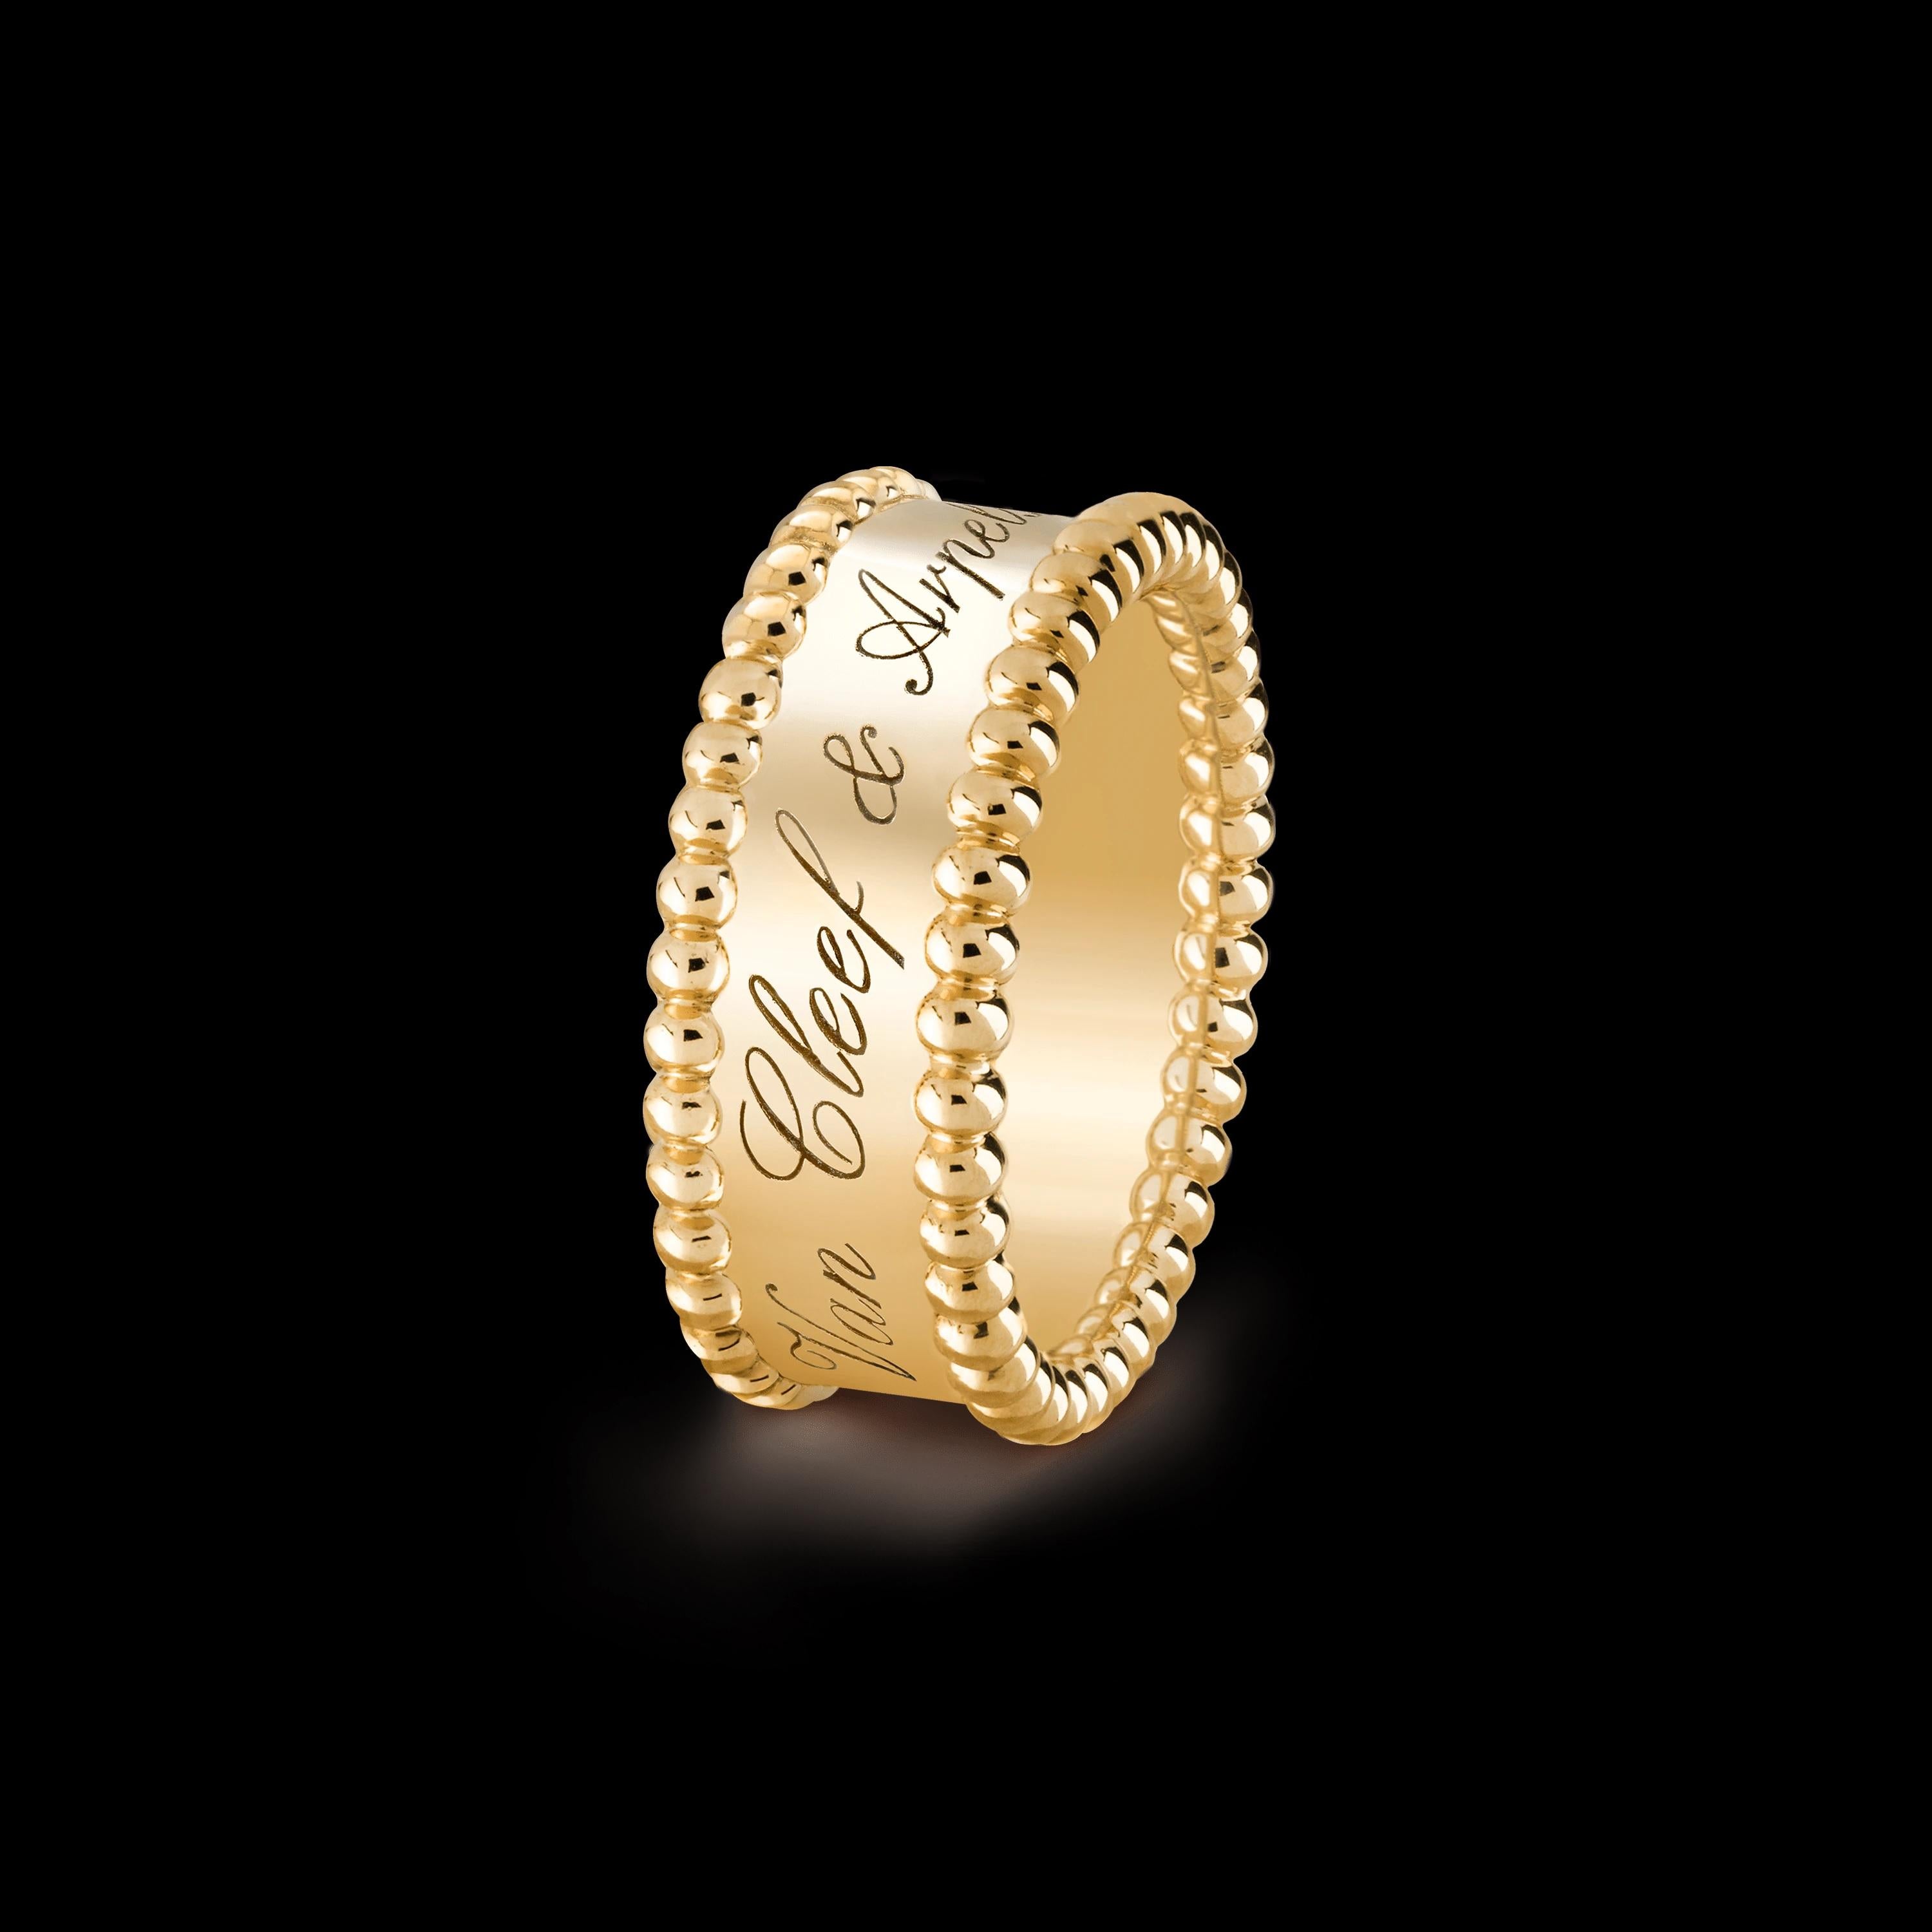 Van Cleef & Arpels Perlee Signature Statement Ring in 18k yellow gold 
Retail price: $2810
Our Price: $2210
Size – 54 (7 US)
Excellent condition polished and serviced to have a pristine second life 
Comes with original case serial number  and